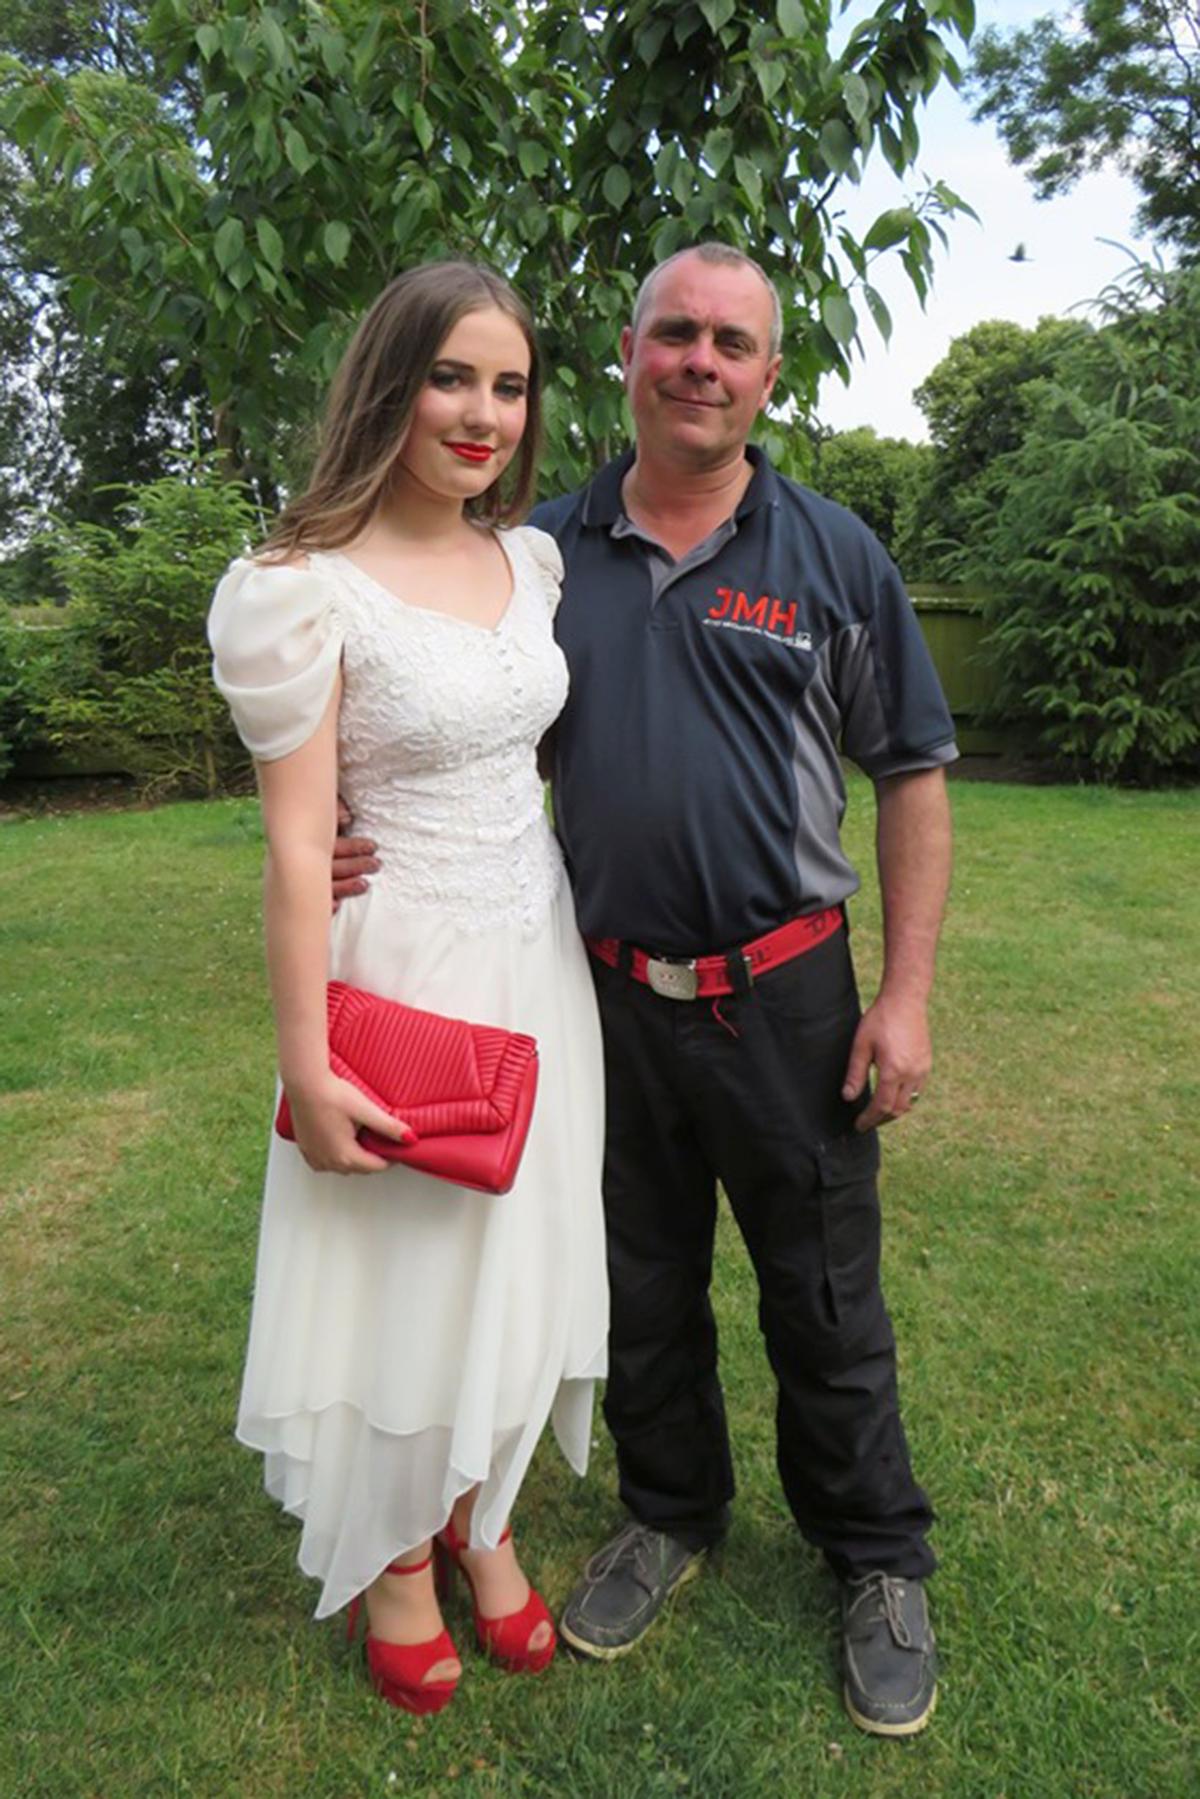 Grace with her dad, David. (Caters News)